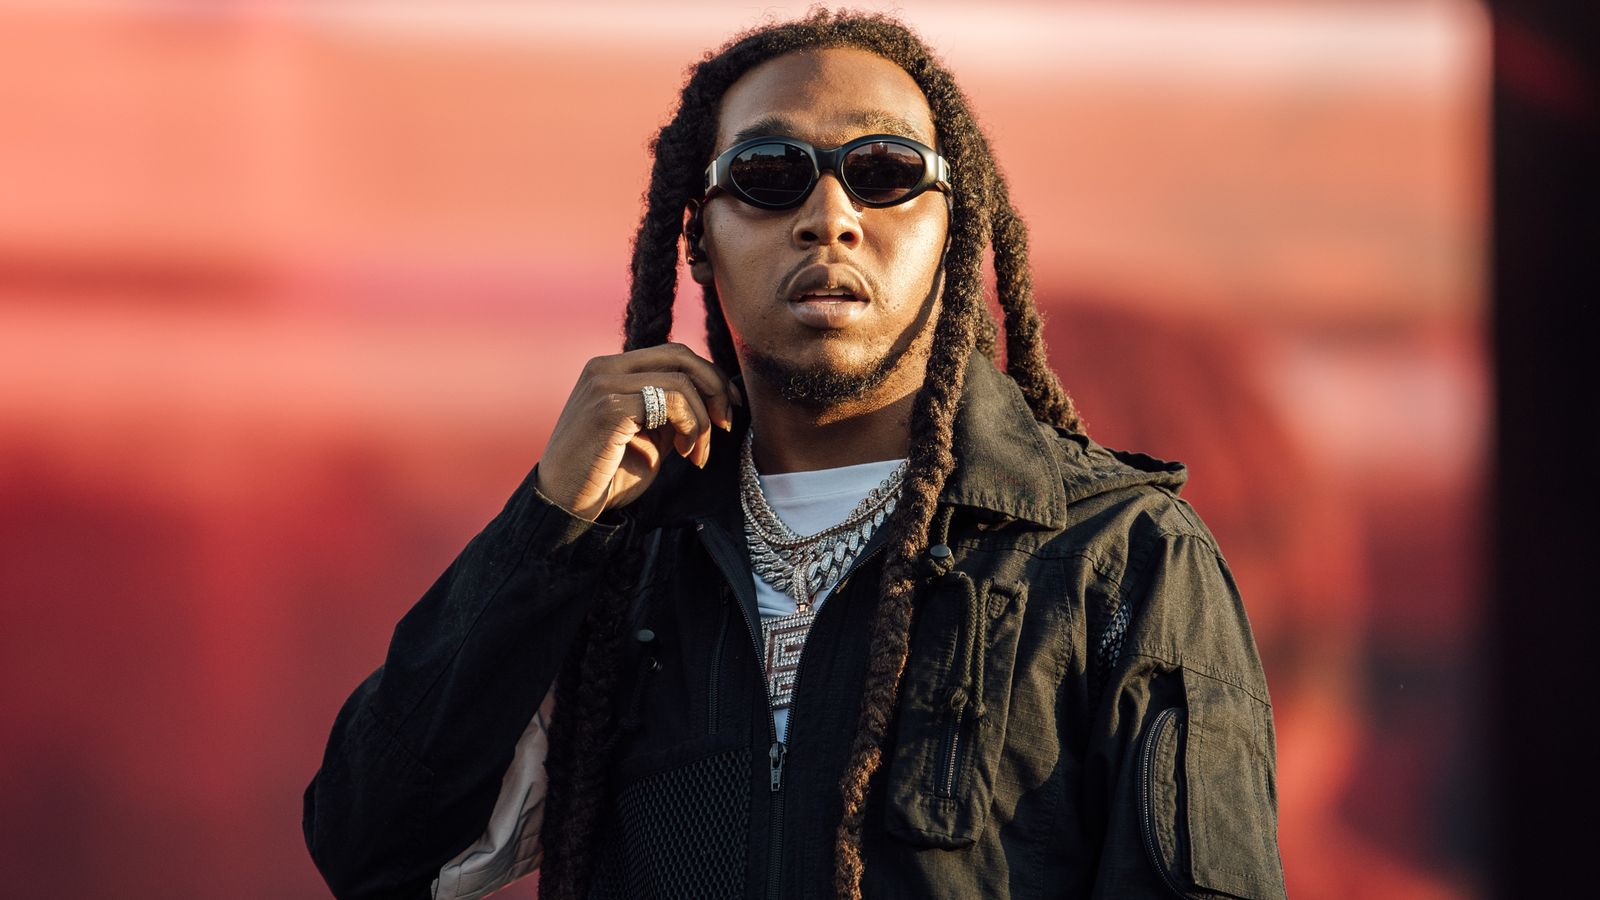 Migos rapper Takeoff shot dead at Houston party